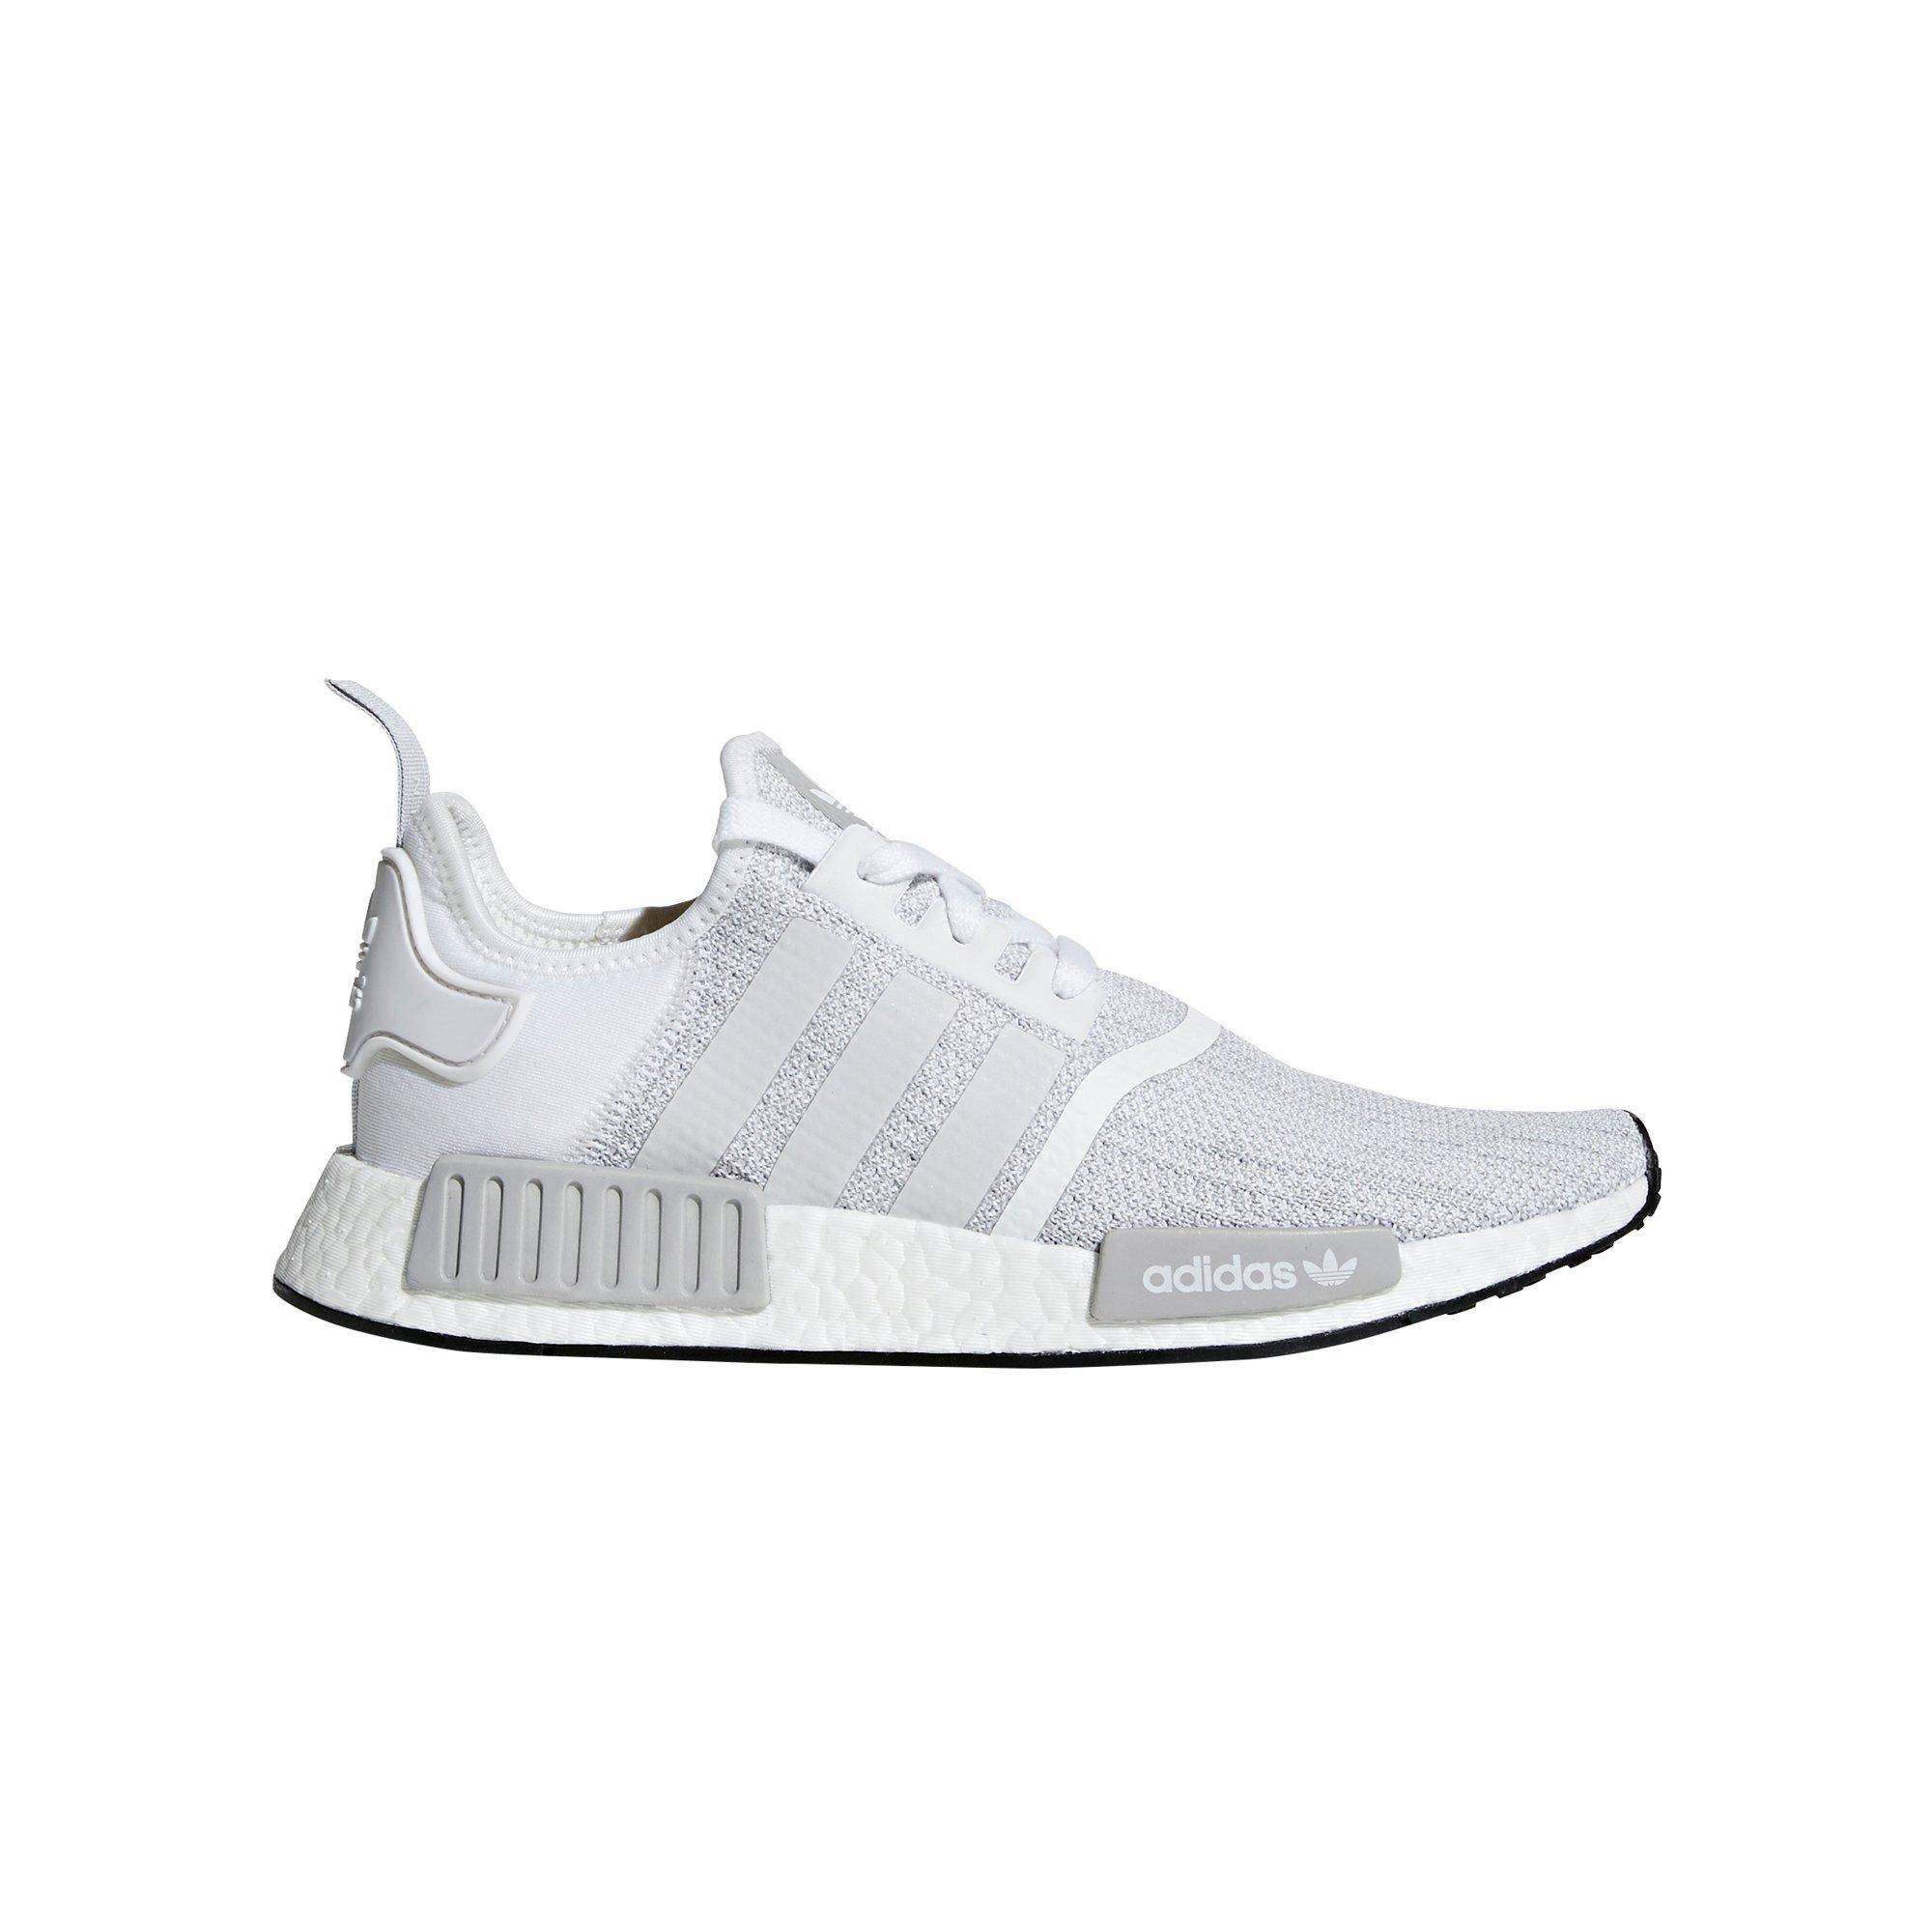 adidas nmd r1 white and gray